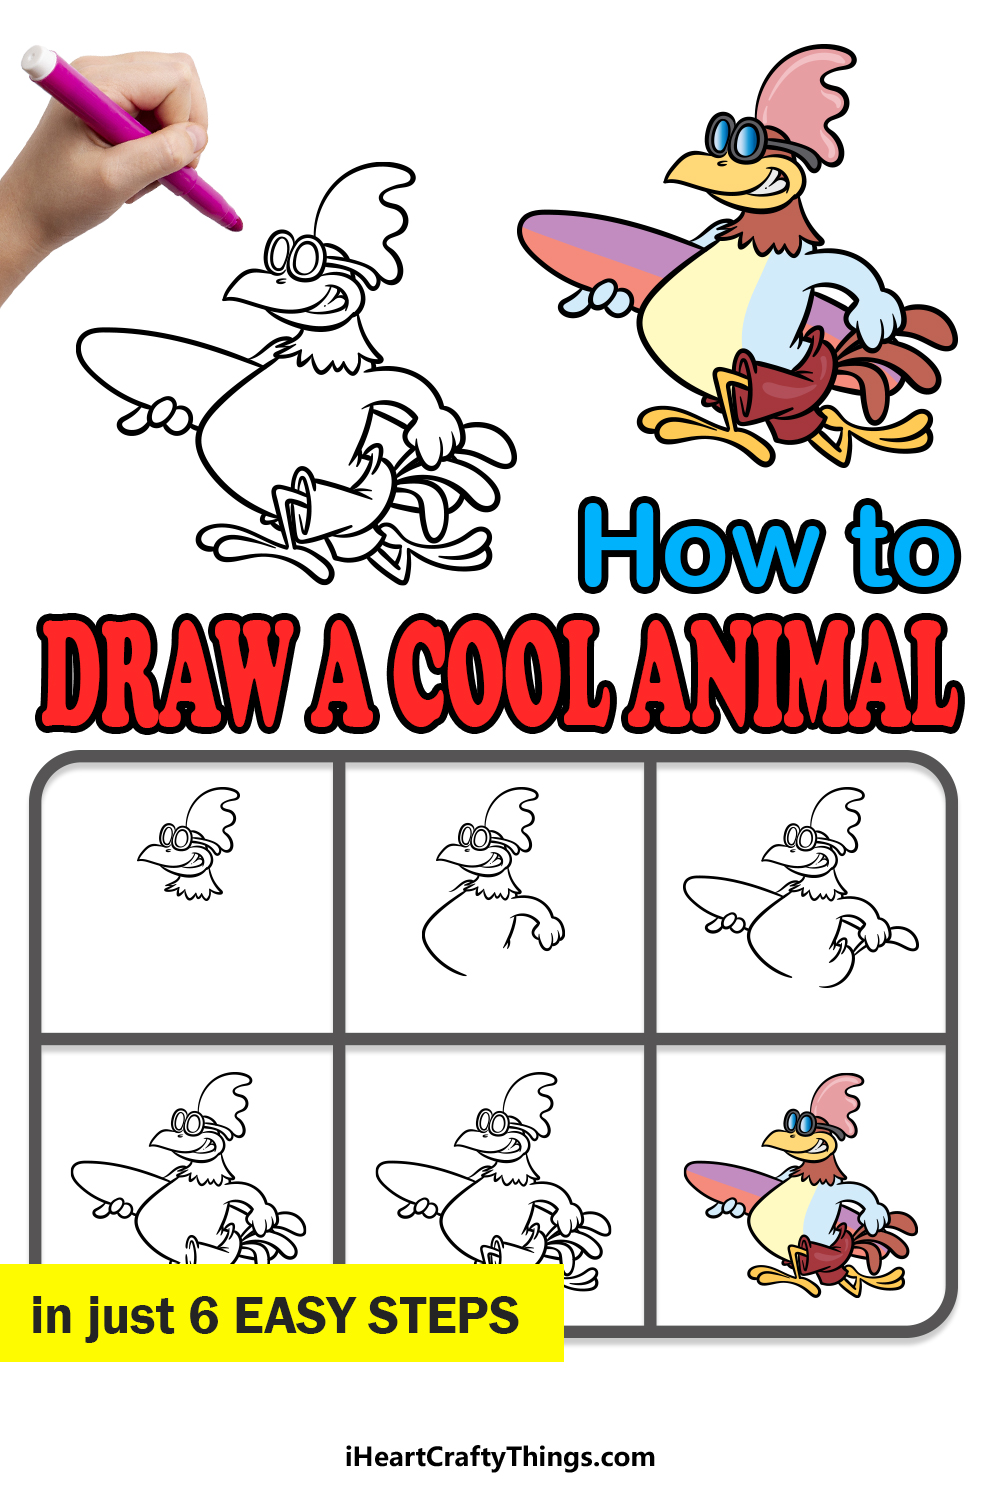 how to draw a Cool Animal in 6 easy steps